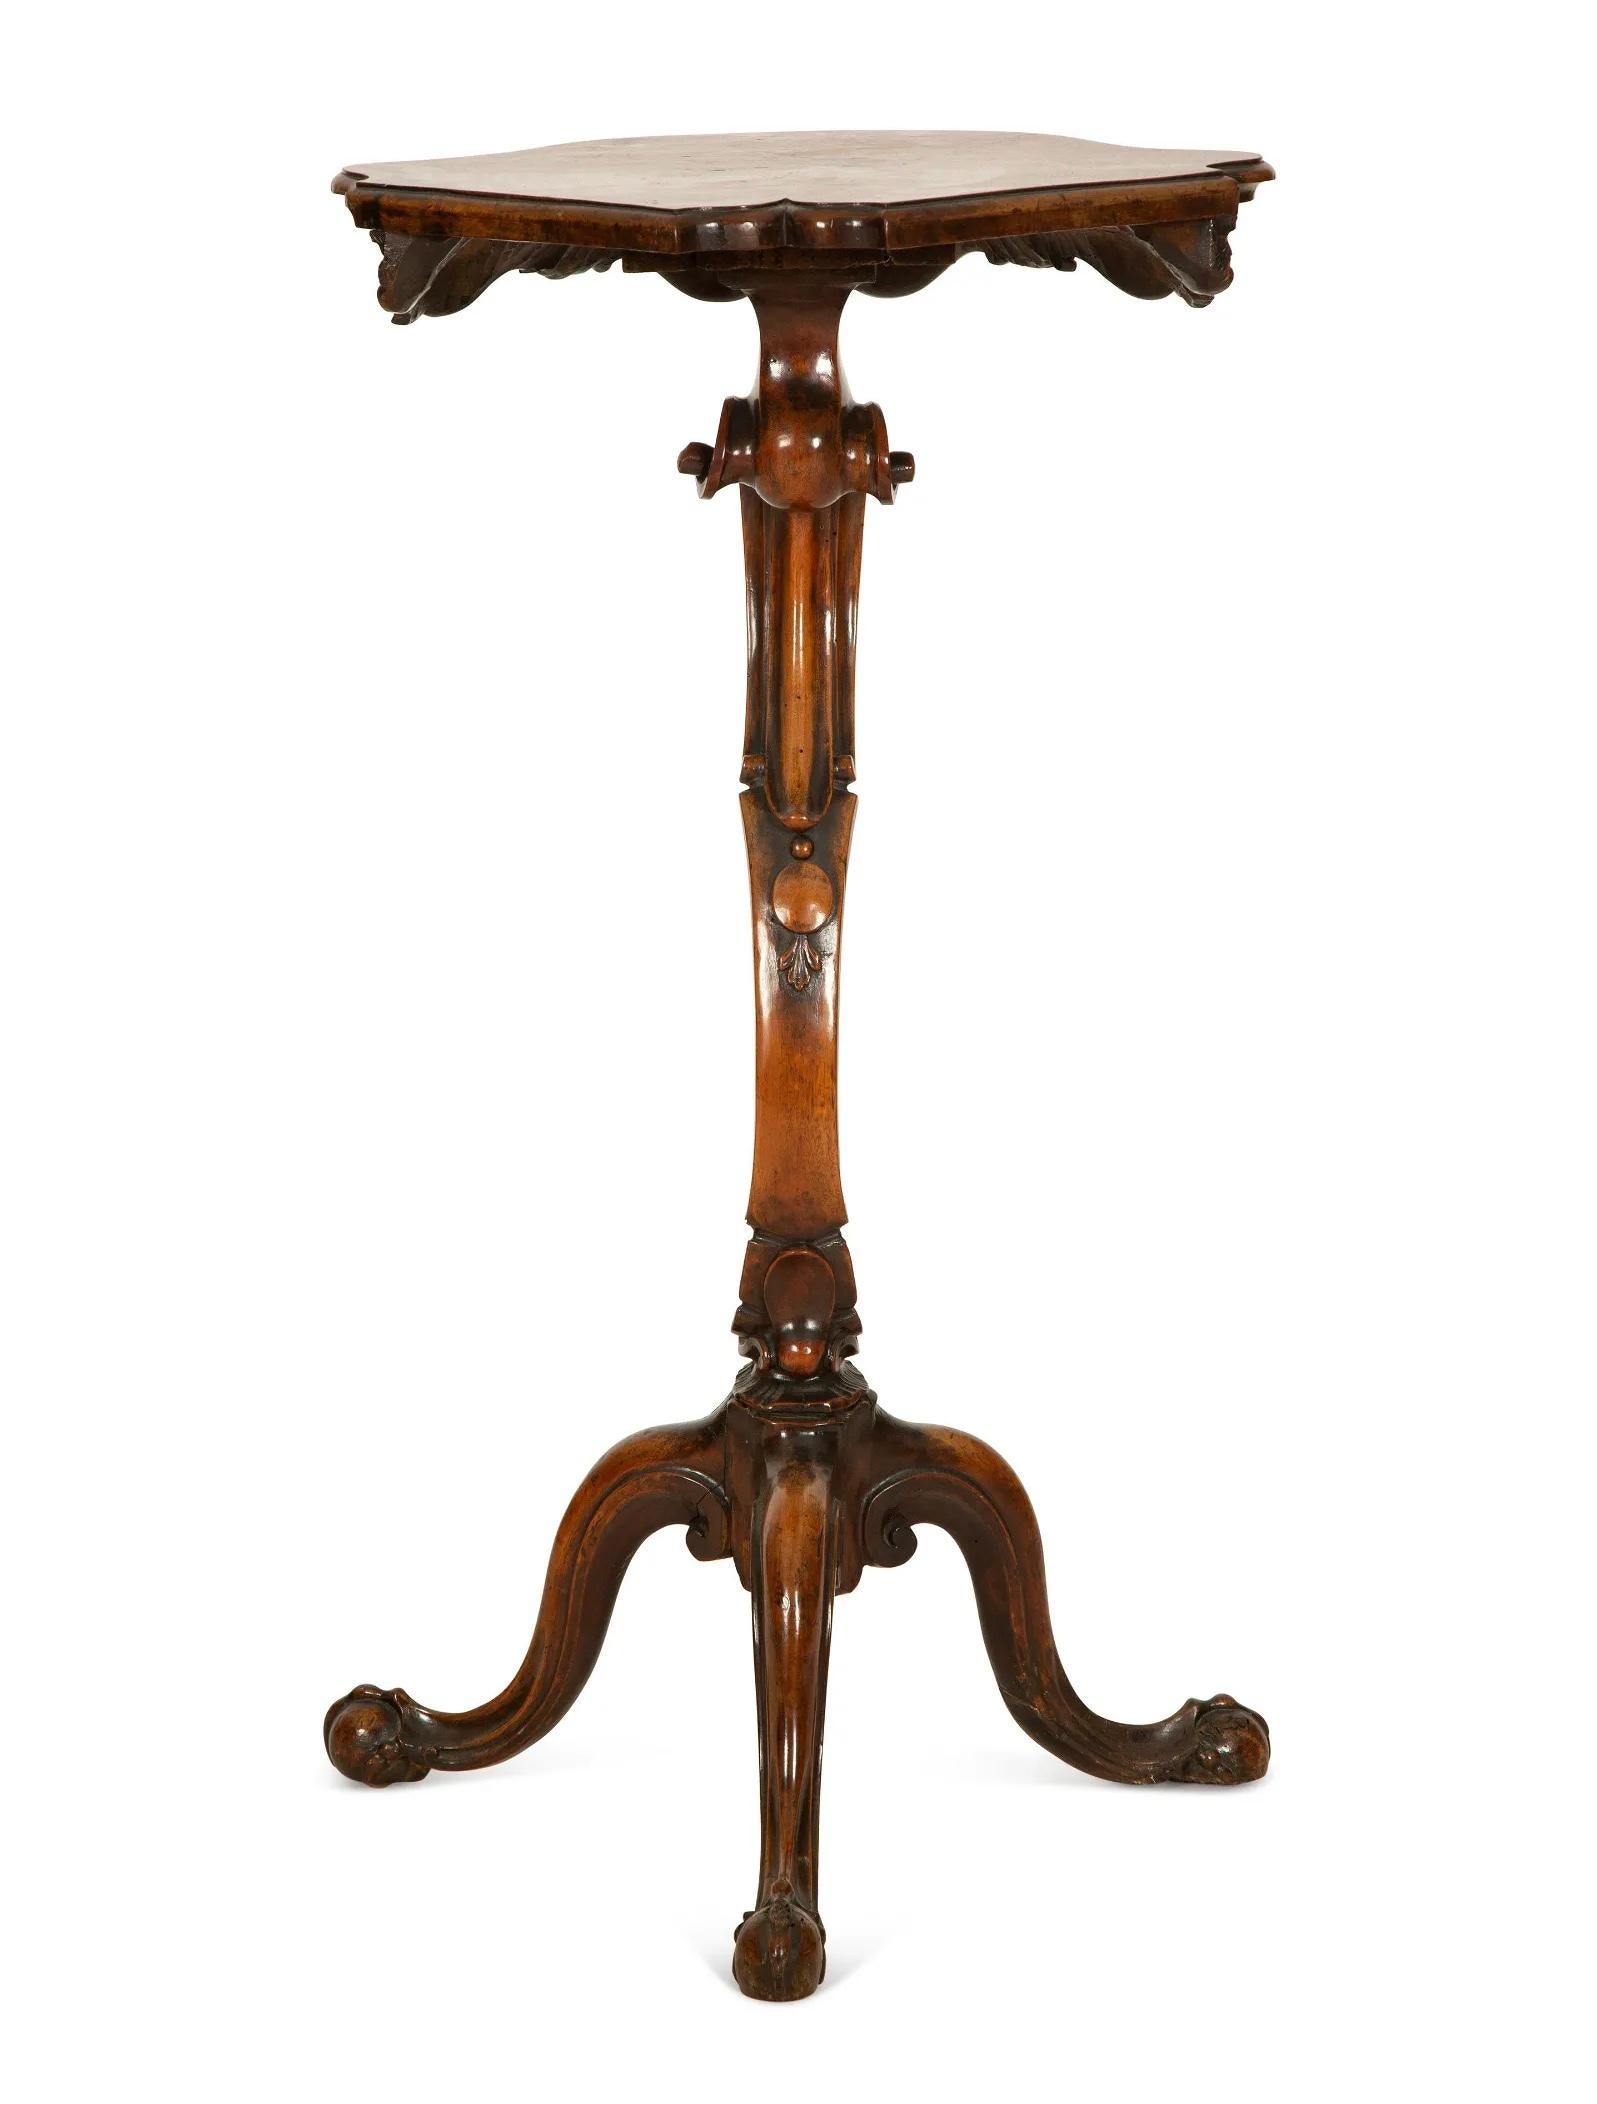 An Italian Rococo Walnut Gueridon À Trespolo, Pedestal.
Late 18th Century
With serpentine shaped walnut top above a carved shaped frieze raised on a carved scrolled support and three carved stepped legs.